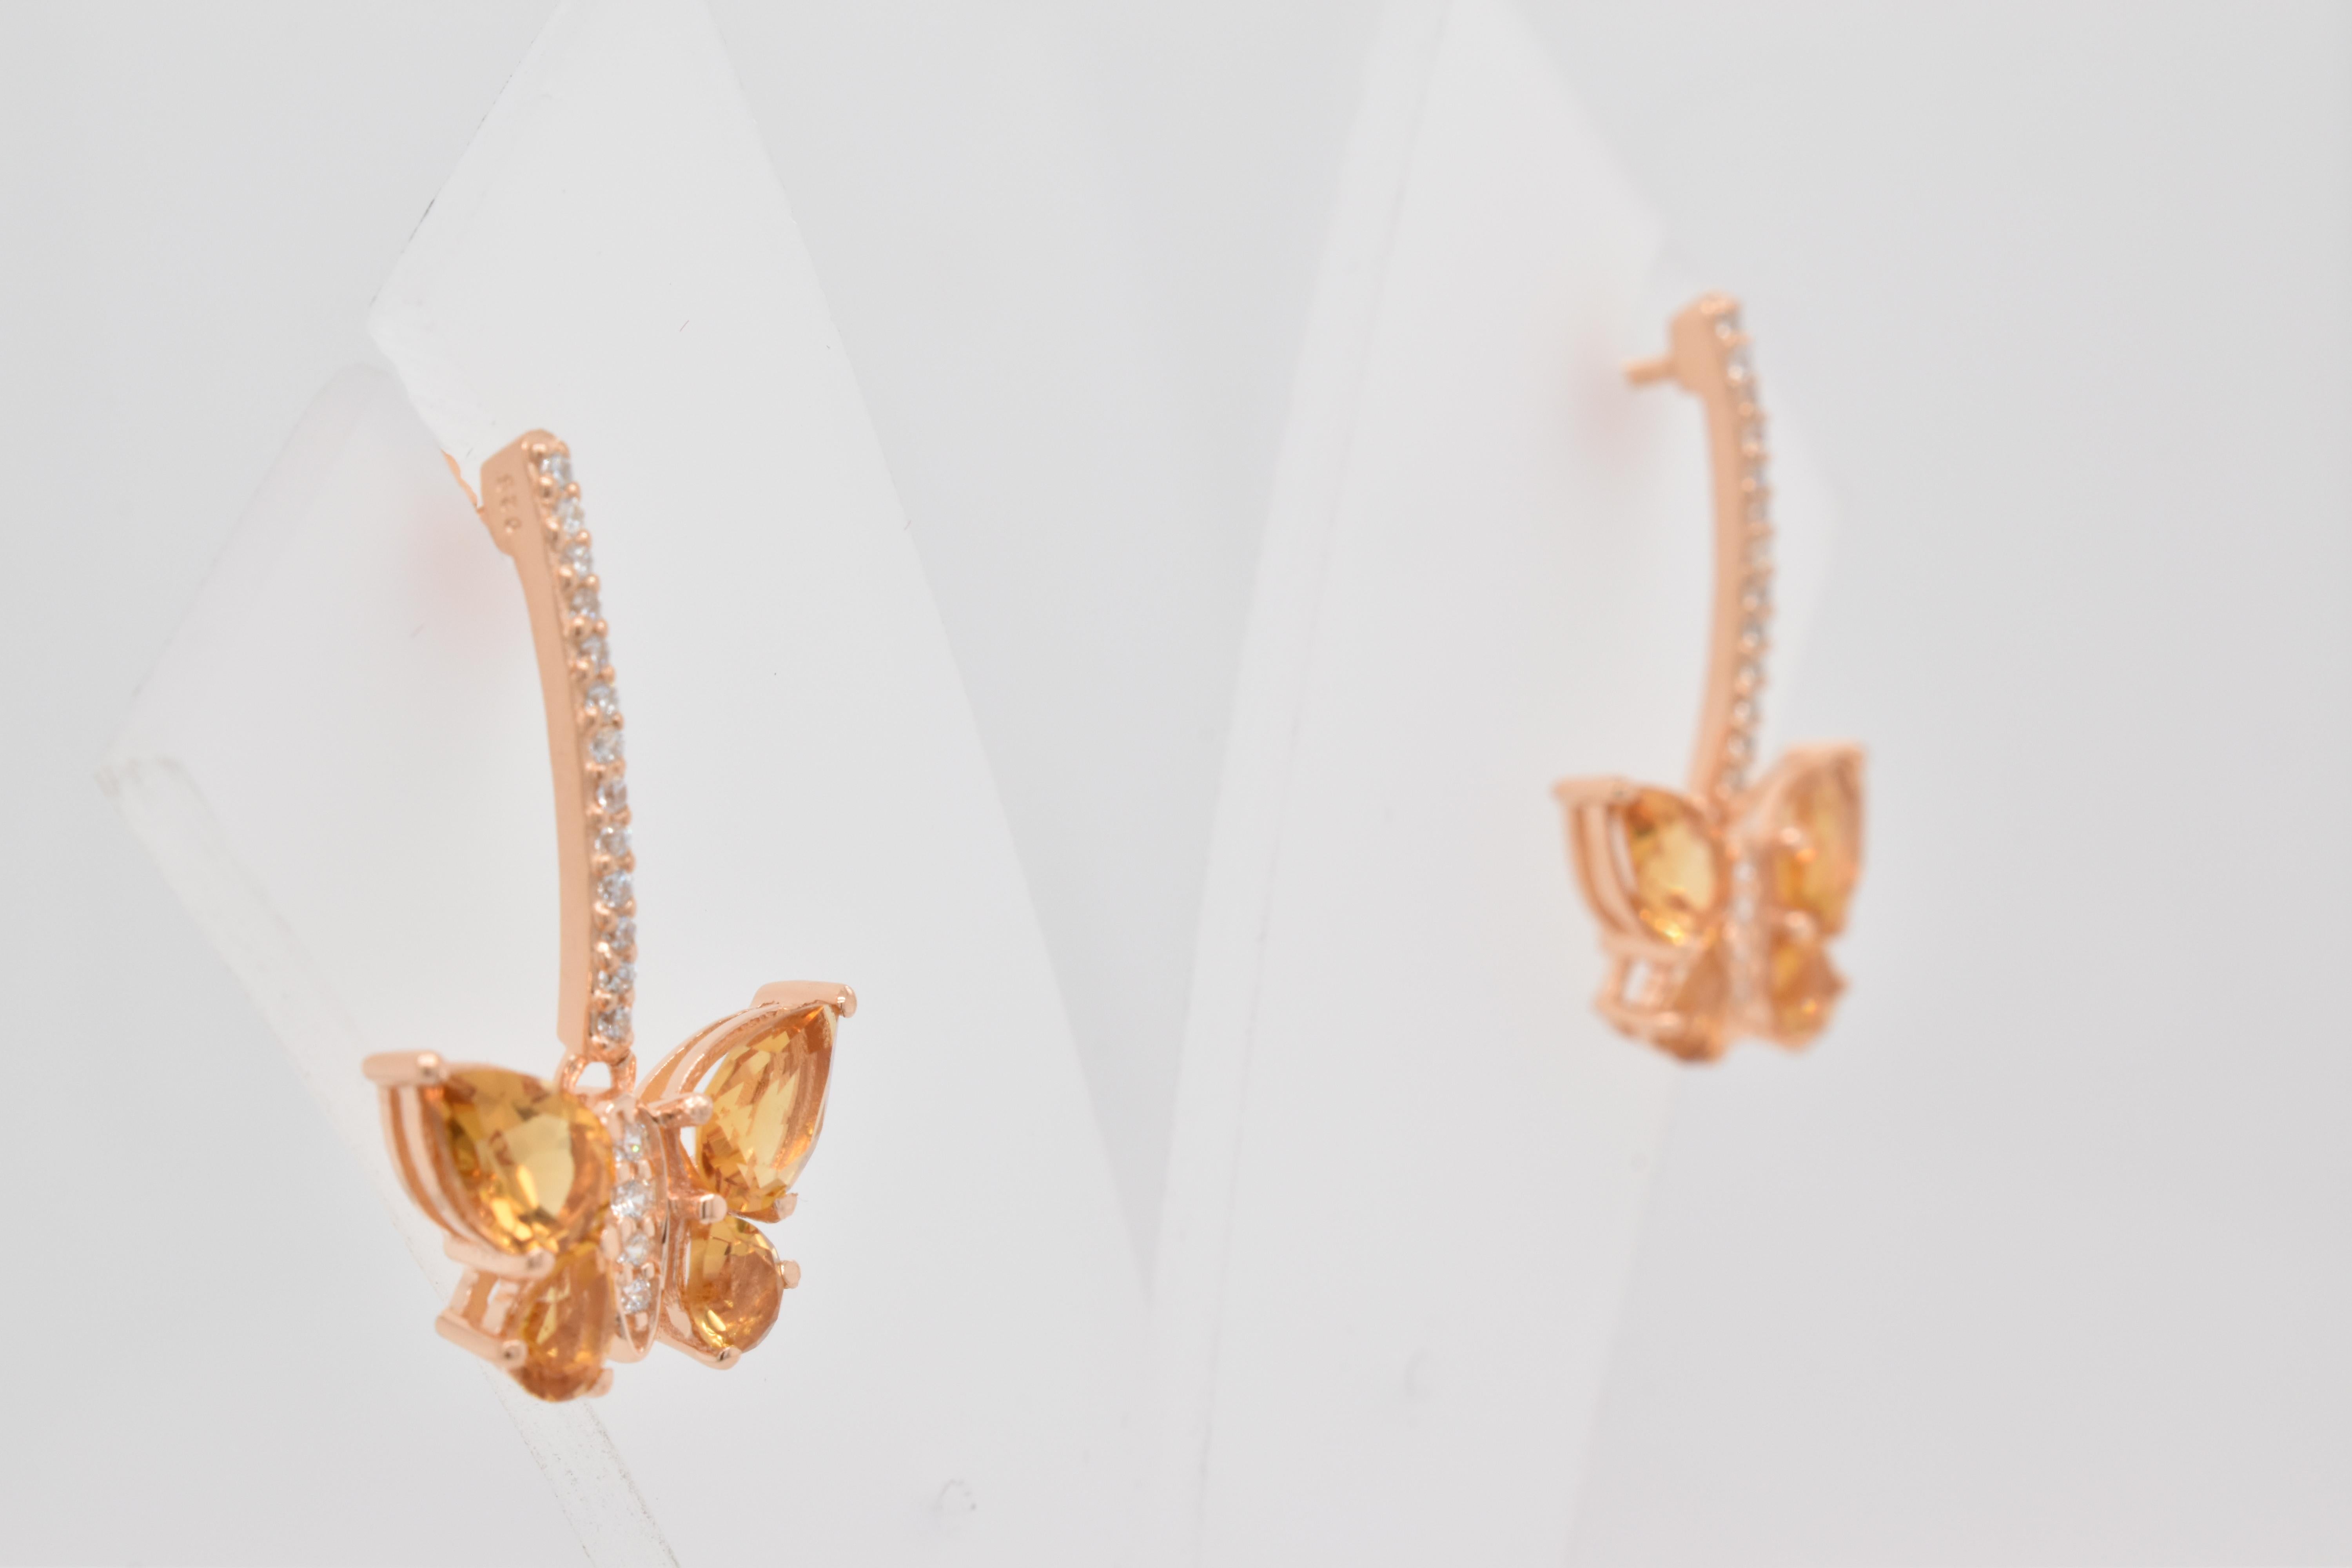 Pear Shape Citrine Gemstone beautifully crafted And CZ in a Earrings. A fiery Yellow Color November Birthstone. For a special occasion like Engagement or Proposal or may be as a gift for a special person.

Primary Stone Size - 6x4 & 4x3 mm